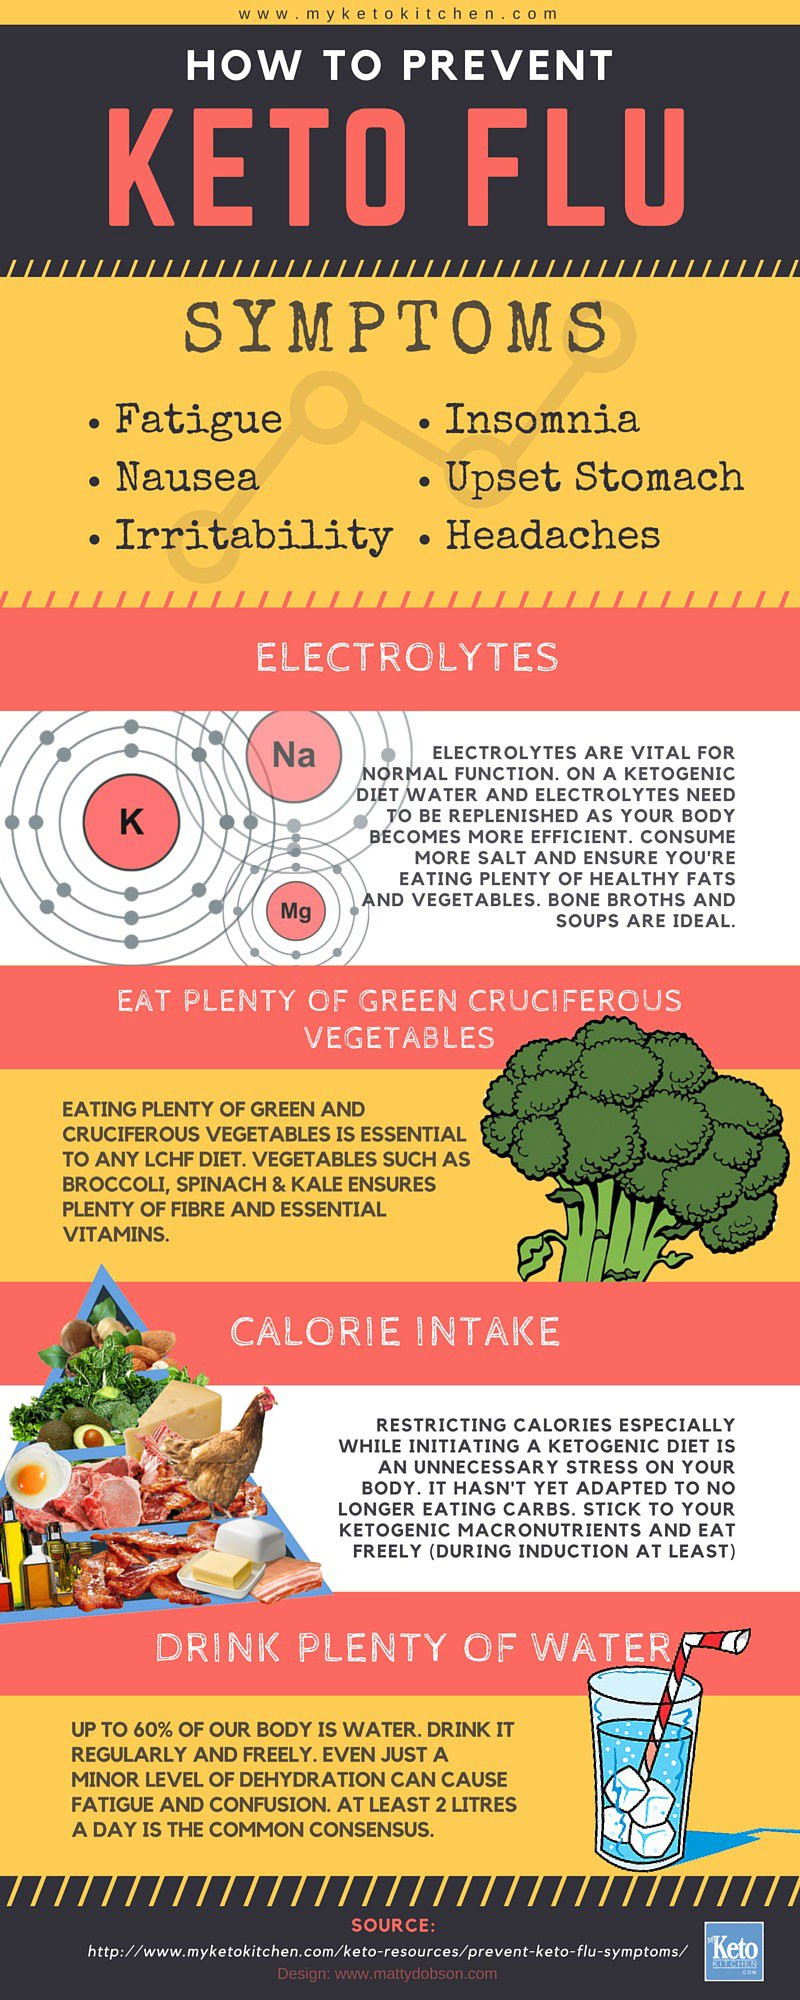 Why Am I Exhausted On The Keto Diet
 How To Prevent Keto Flu & Symptoms [infographic]